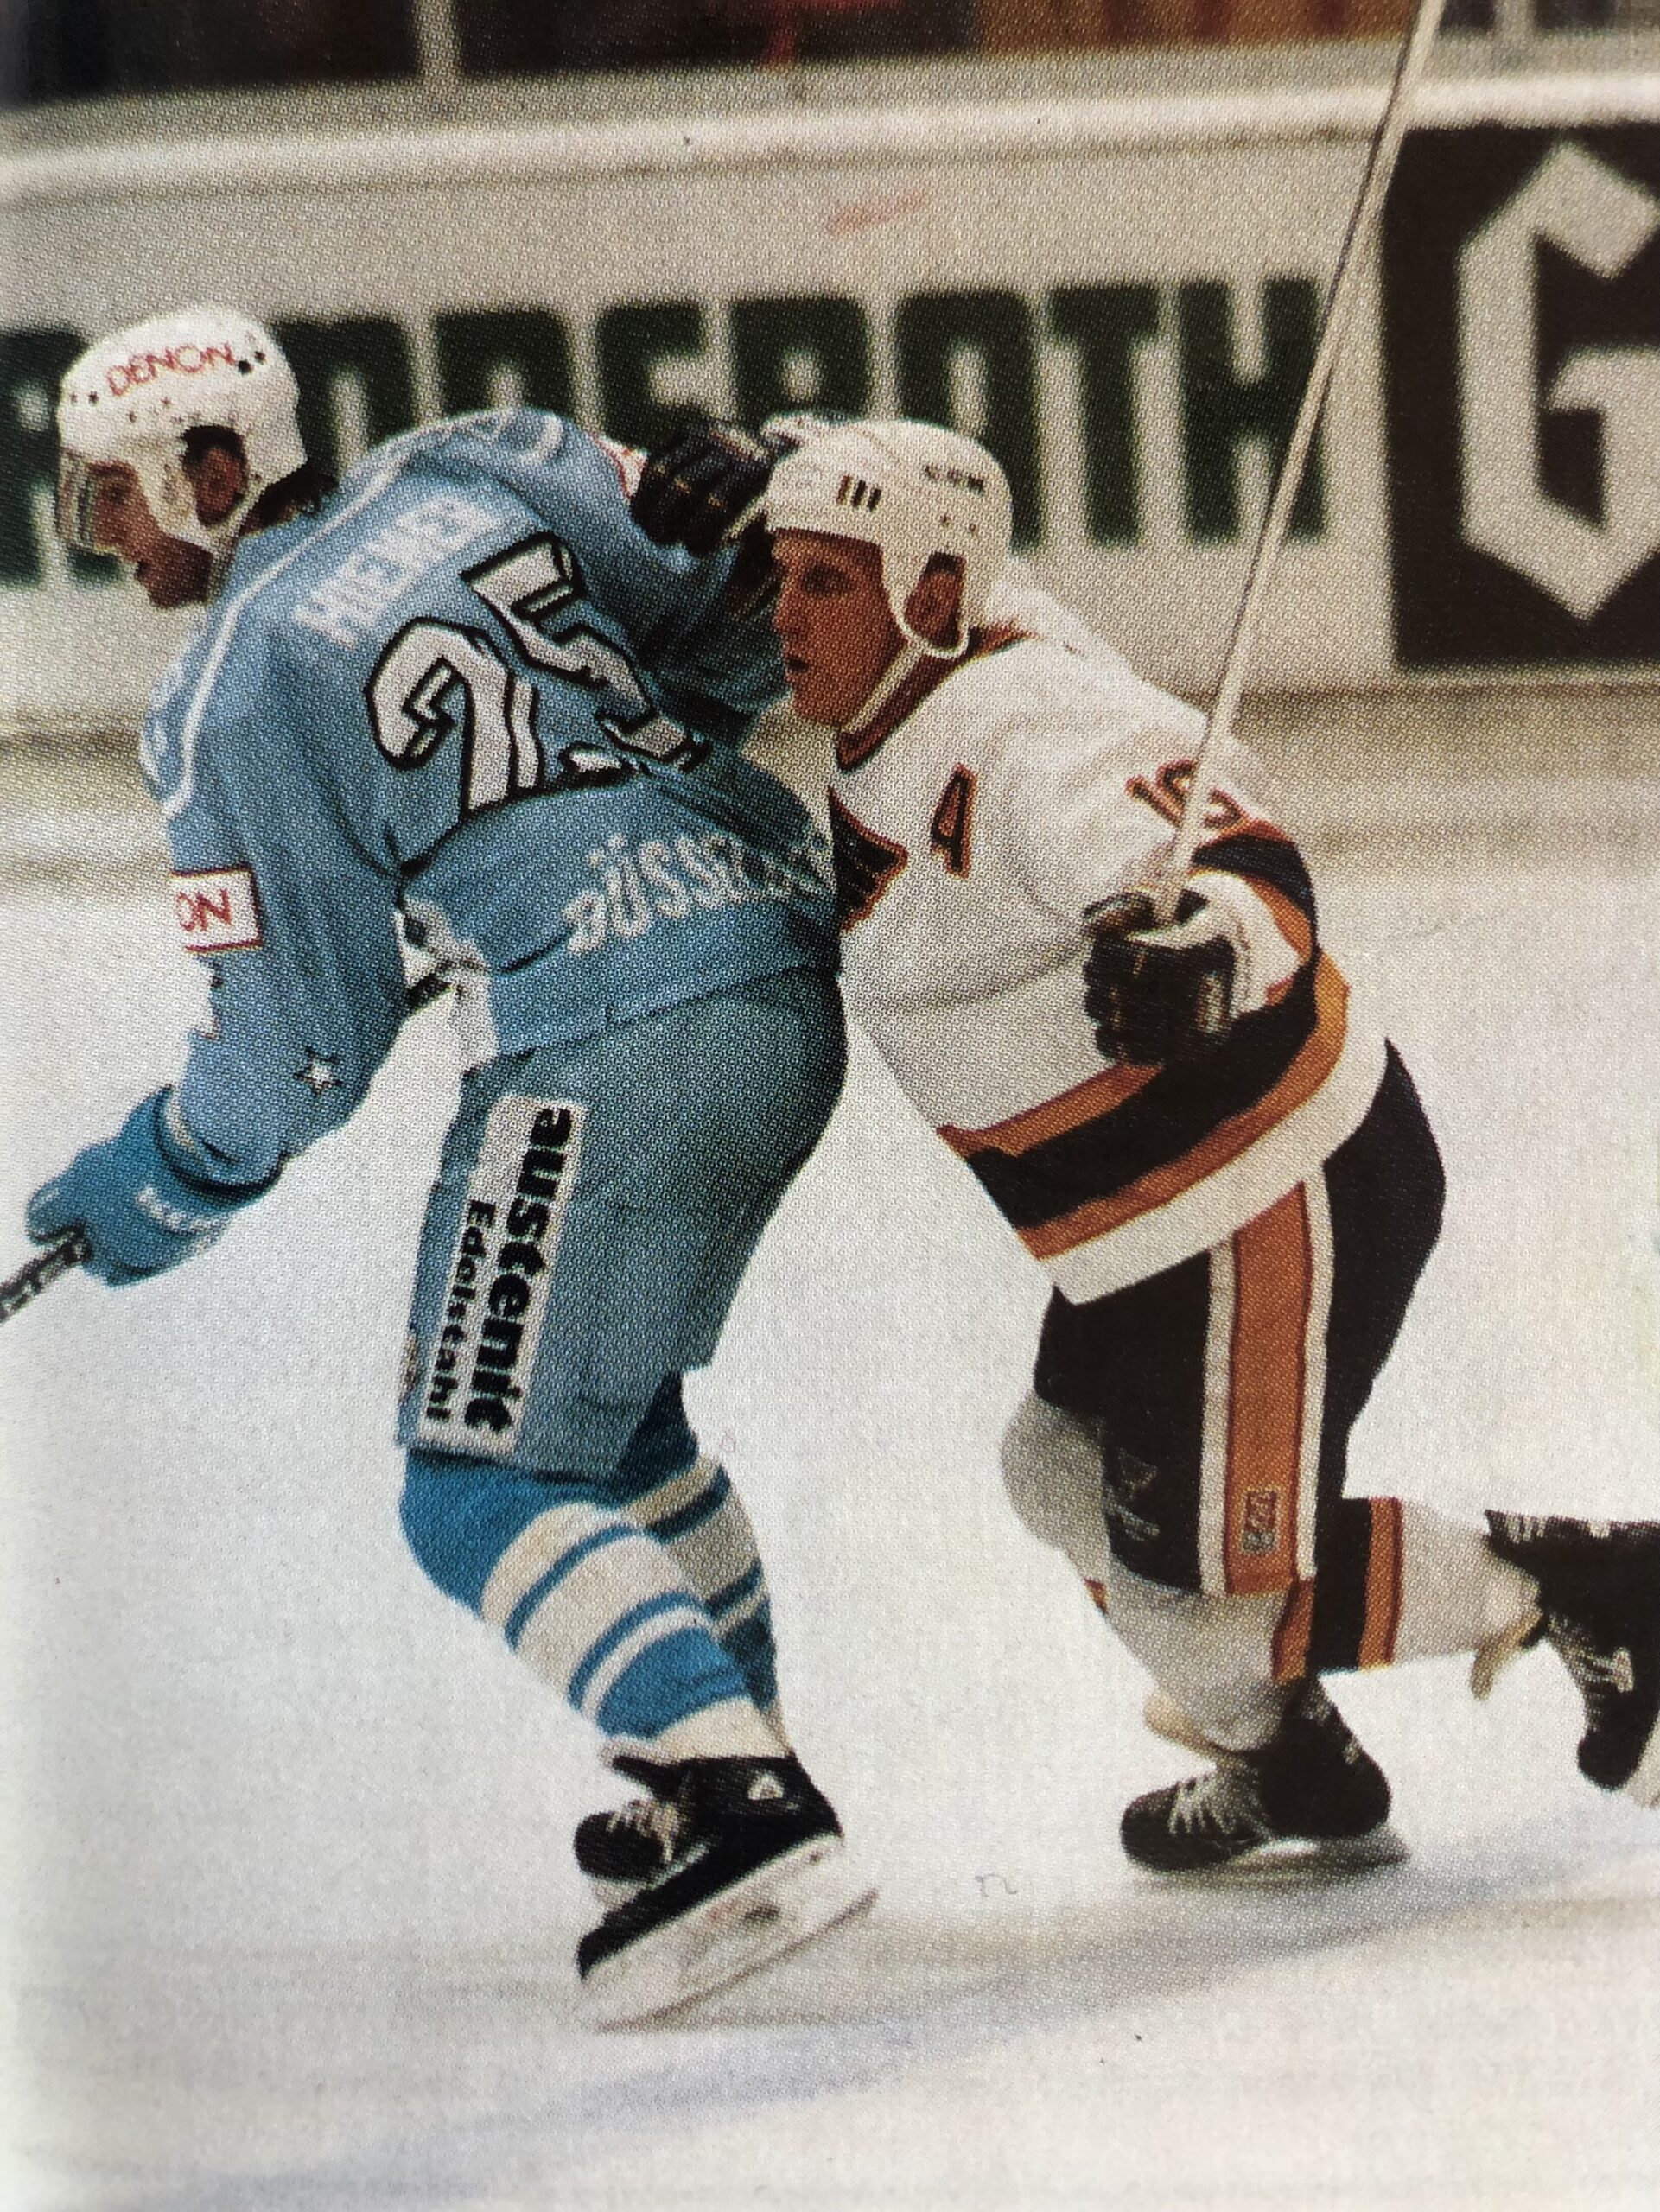 NHL-Challenge, Epson-Cup 1990